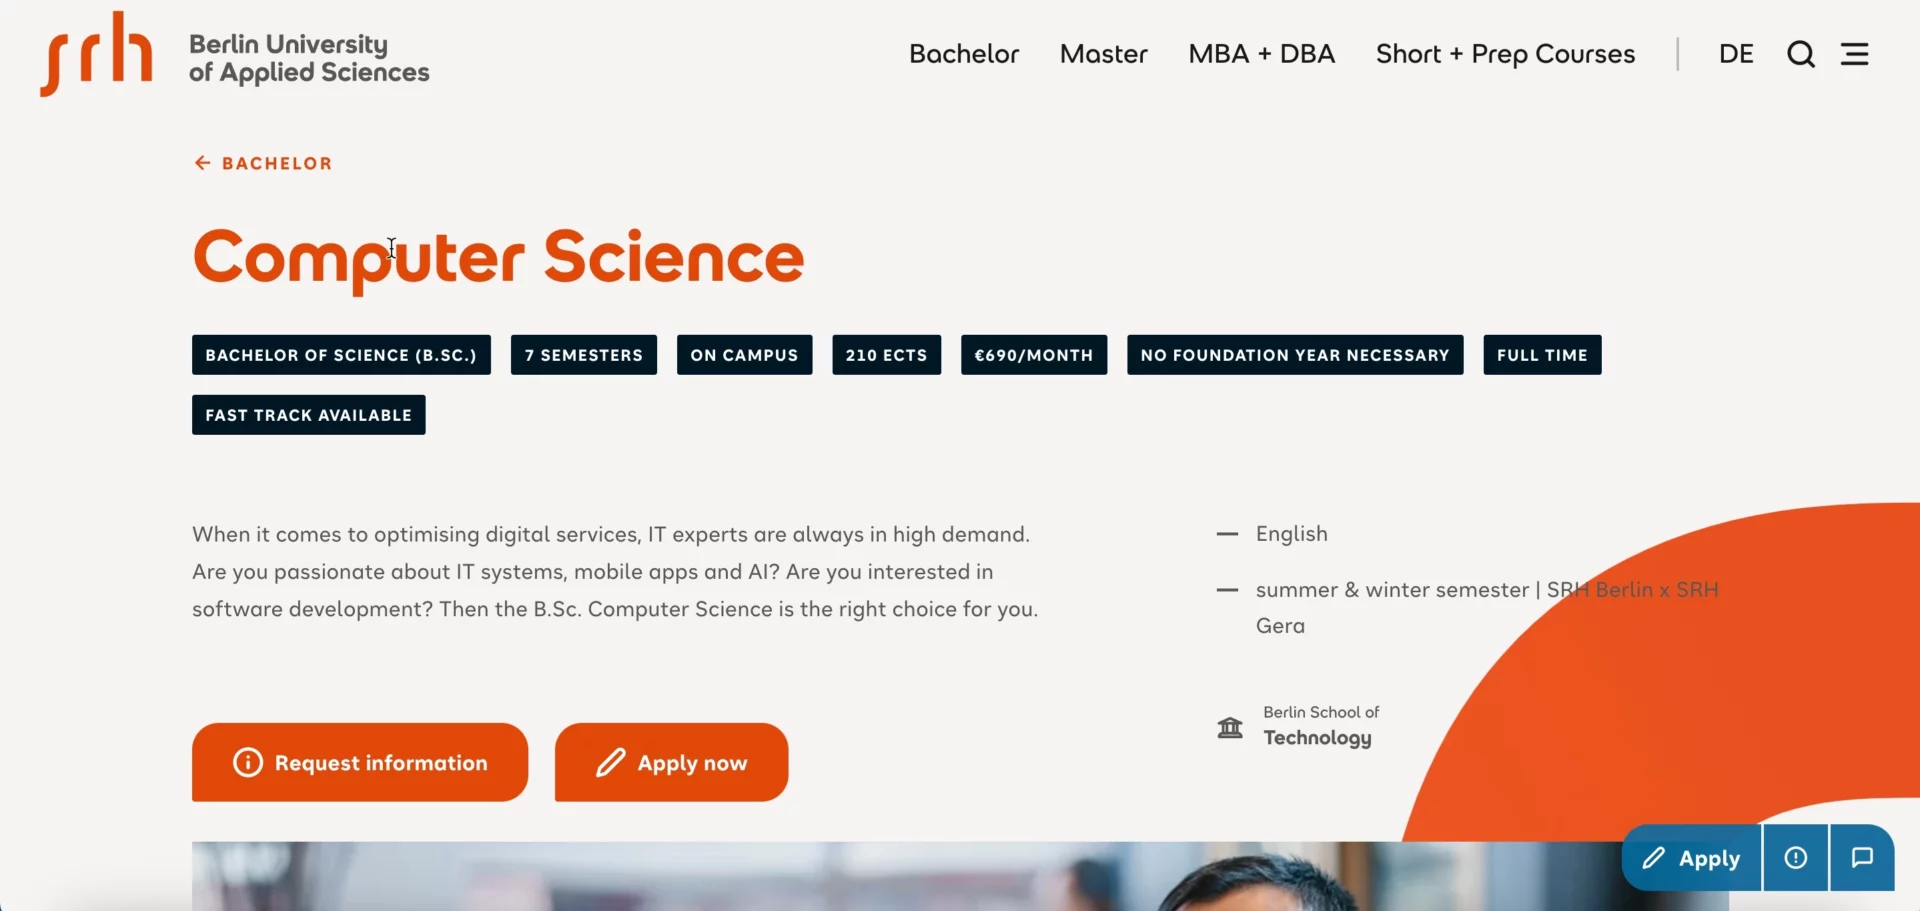 Berlin's University of Applied Science landing page advertising a Bachelor's degree in Computer Science